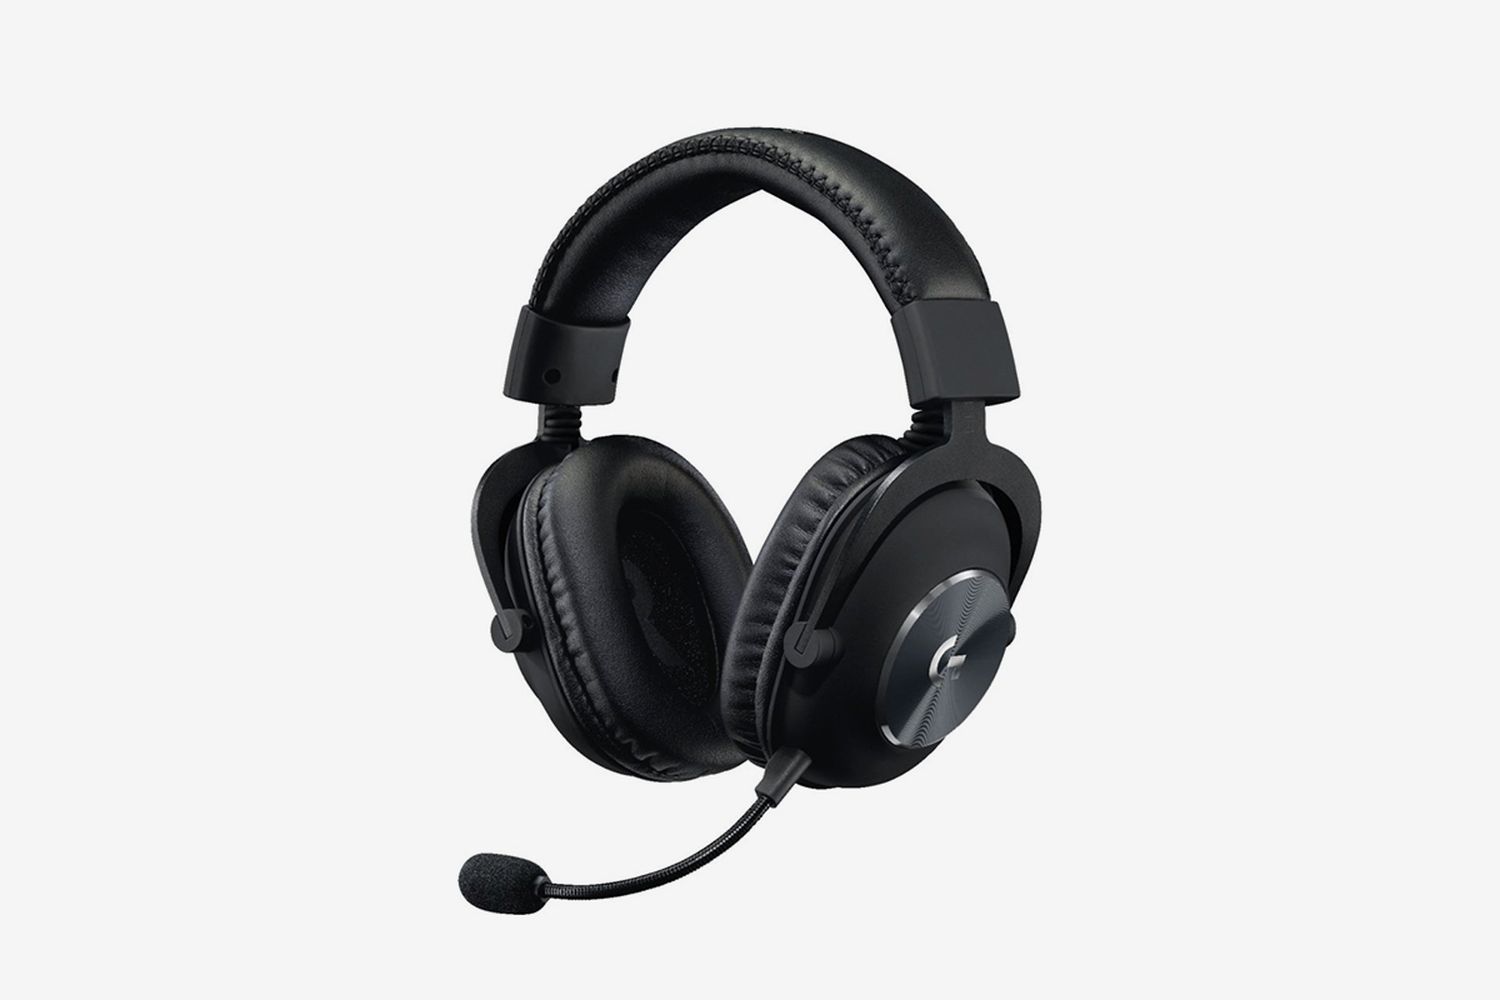 G PRO X Wired 7.1 Surround Sound Gaming Headset for Windows